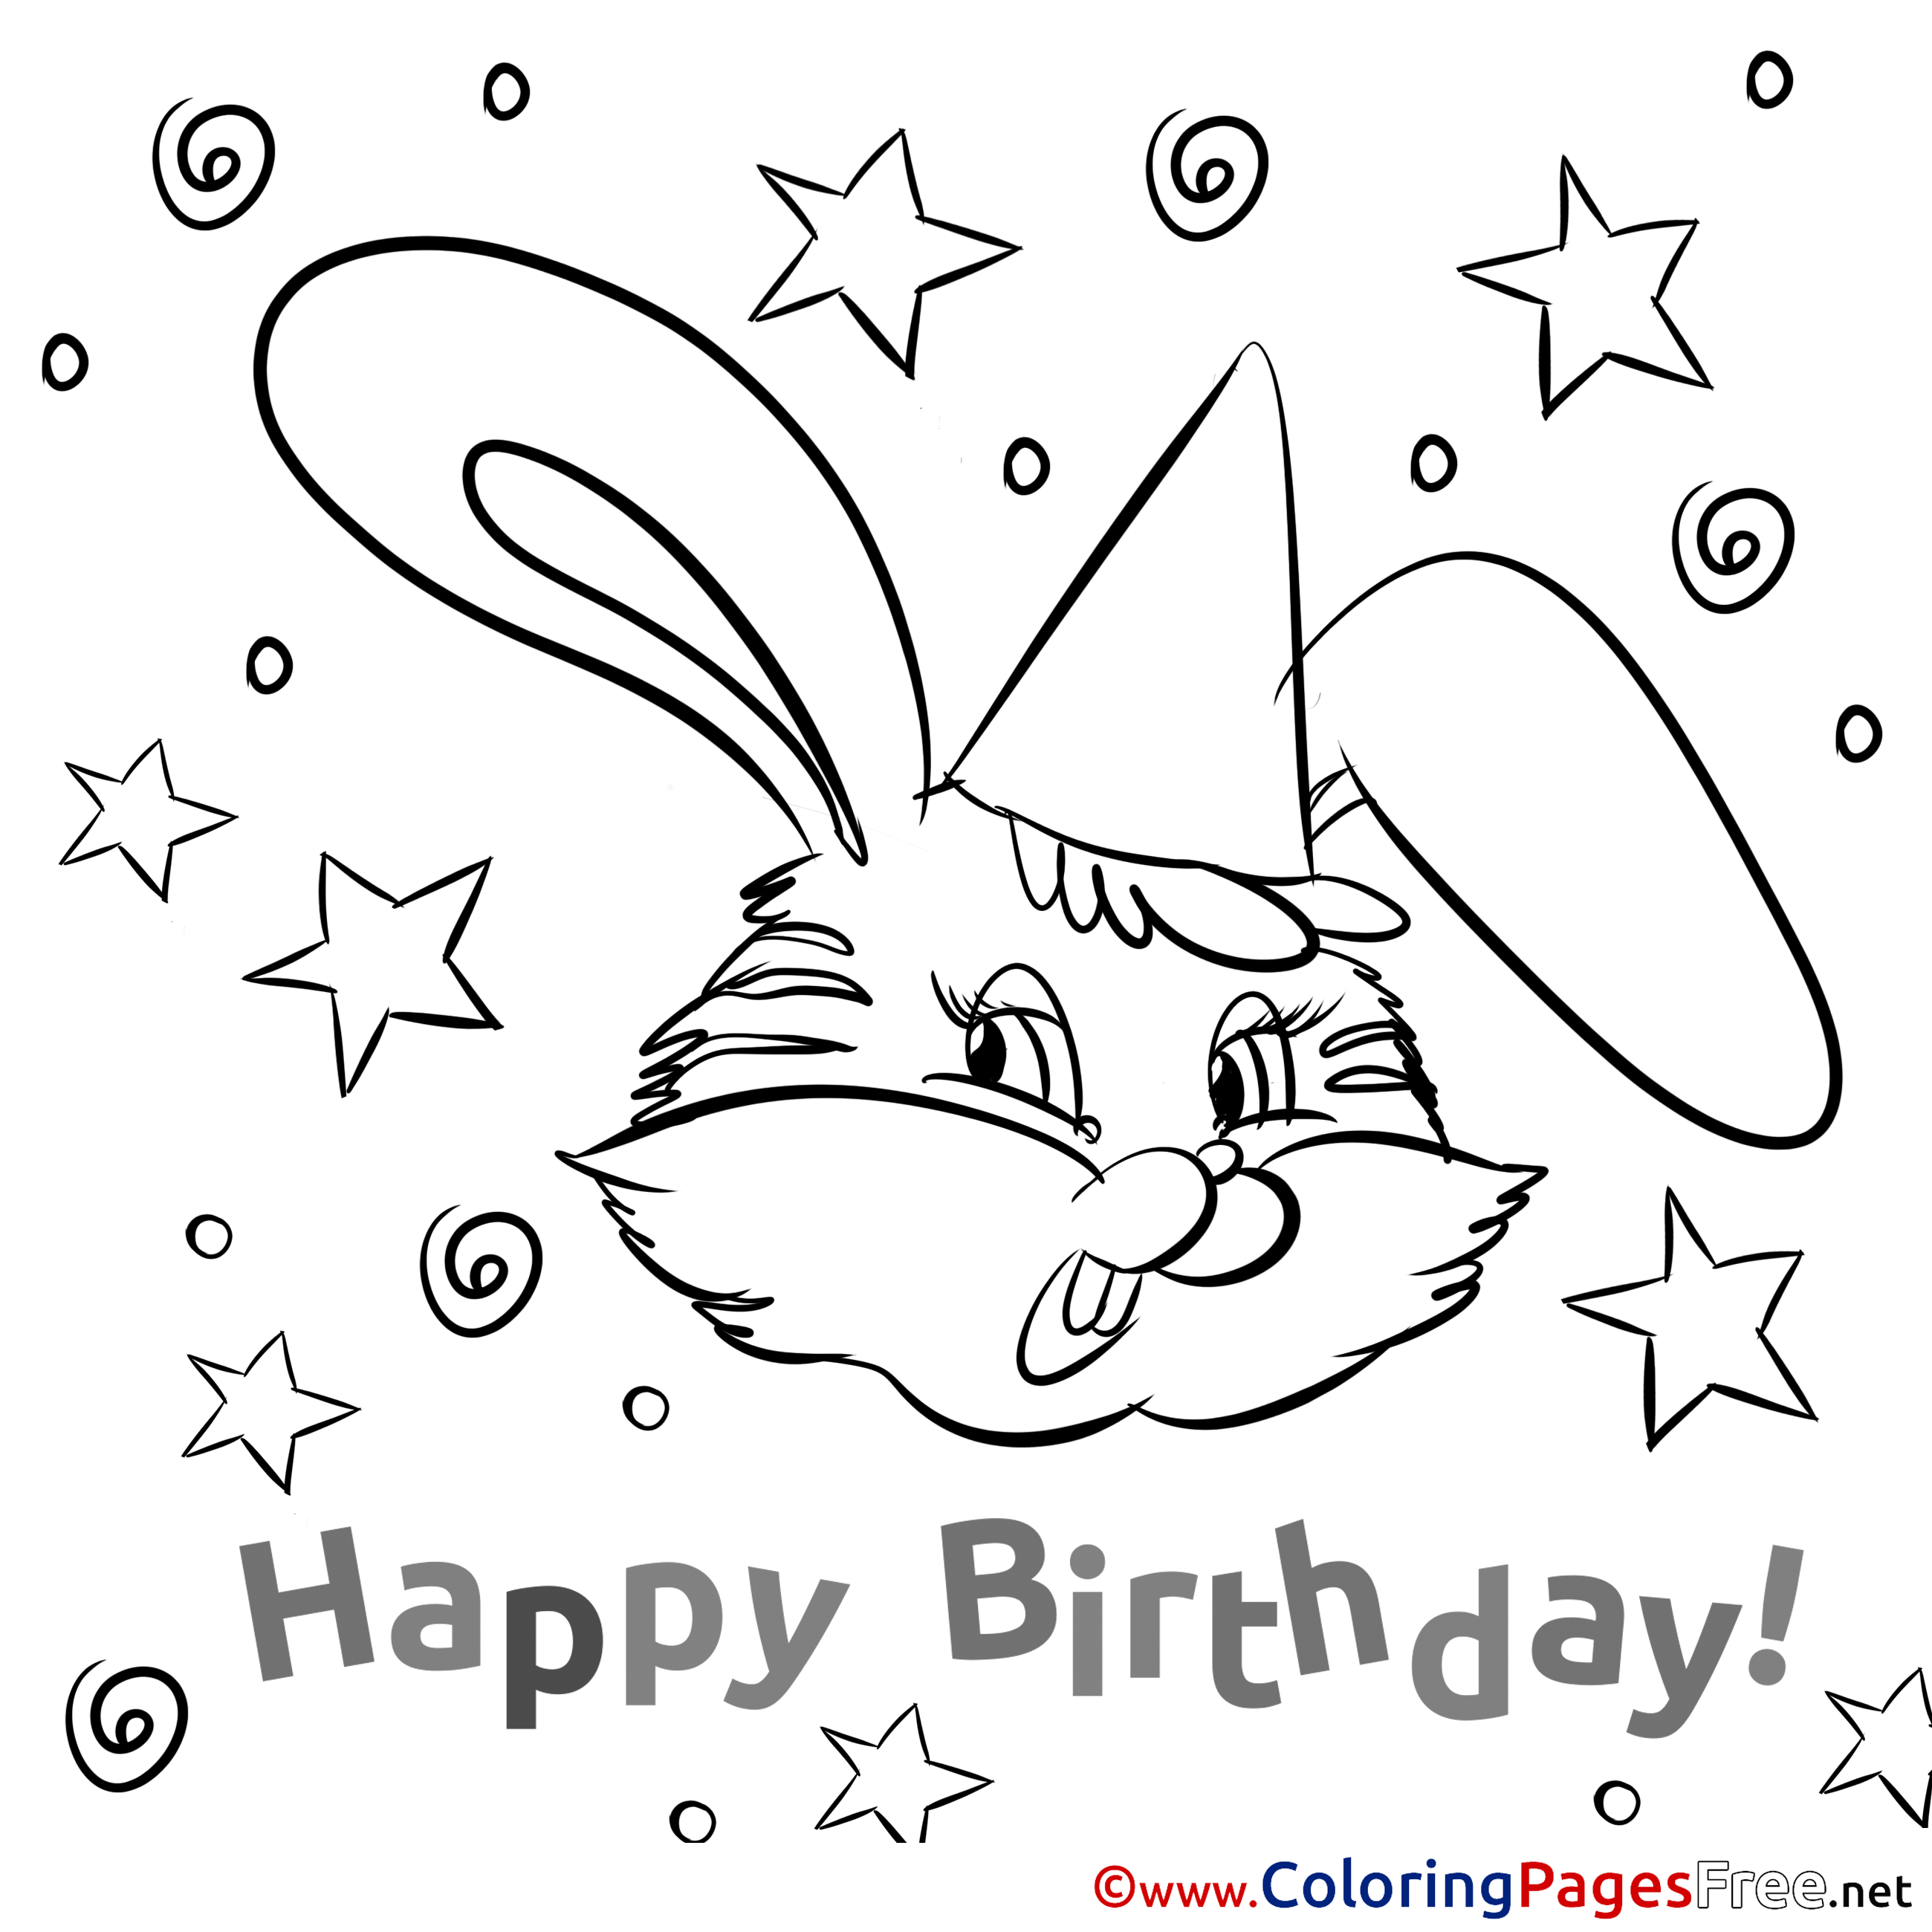 Bunny Colouring Page Happy Birthday Free Sketch Coloring Page.